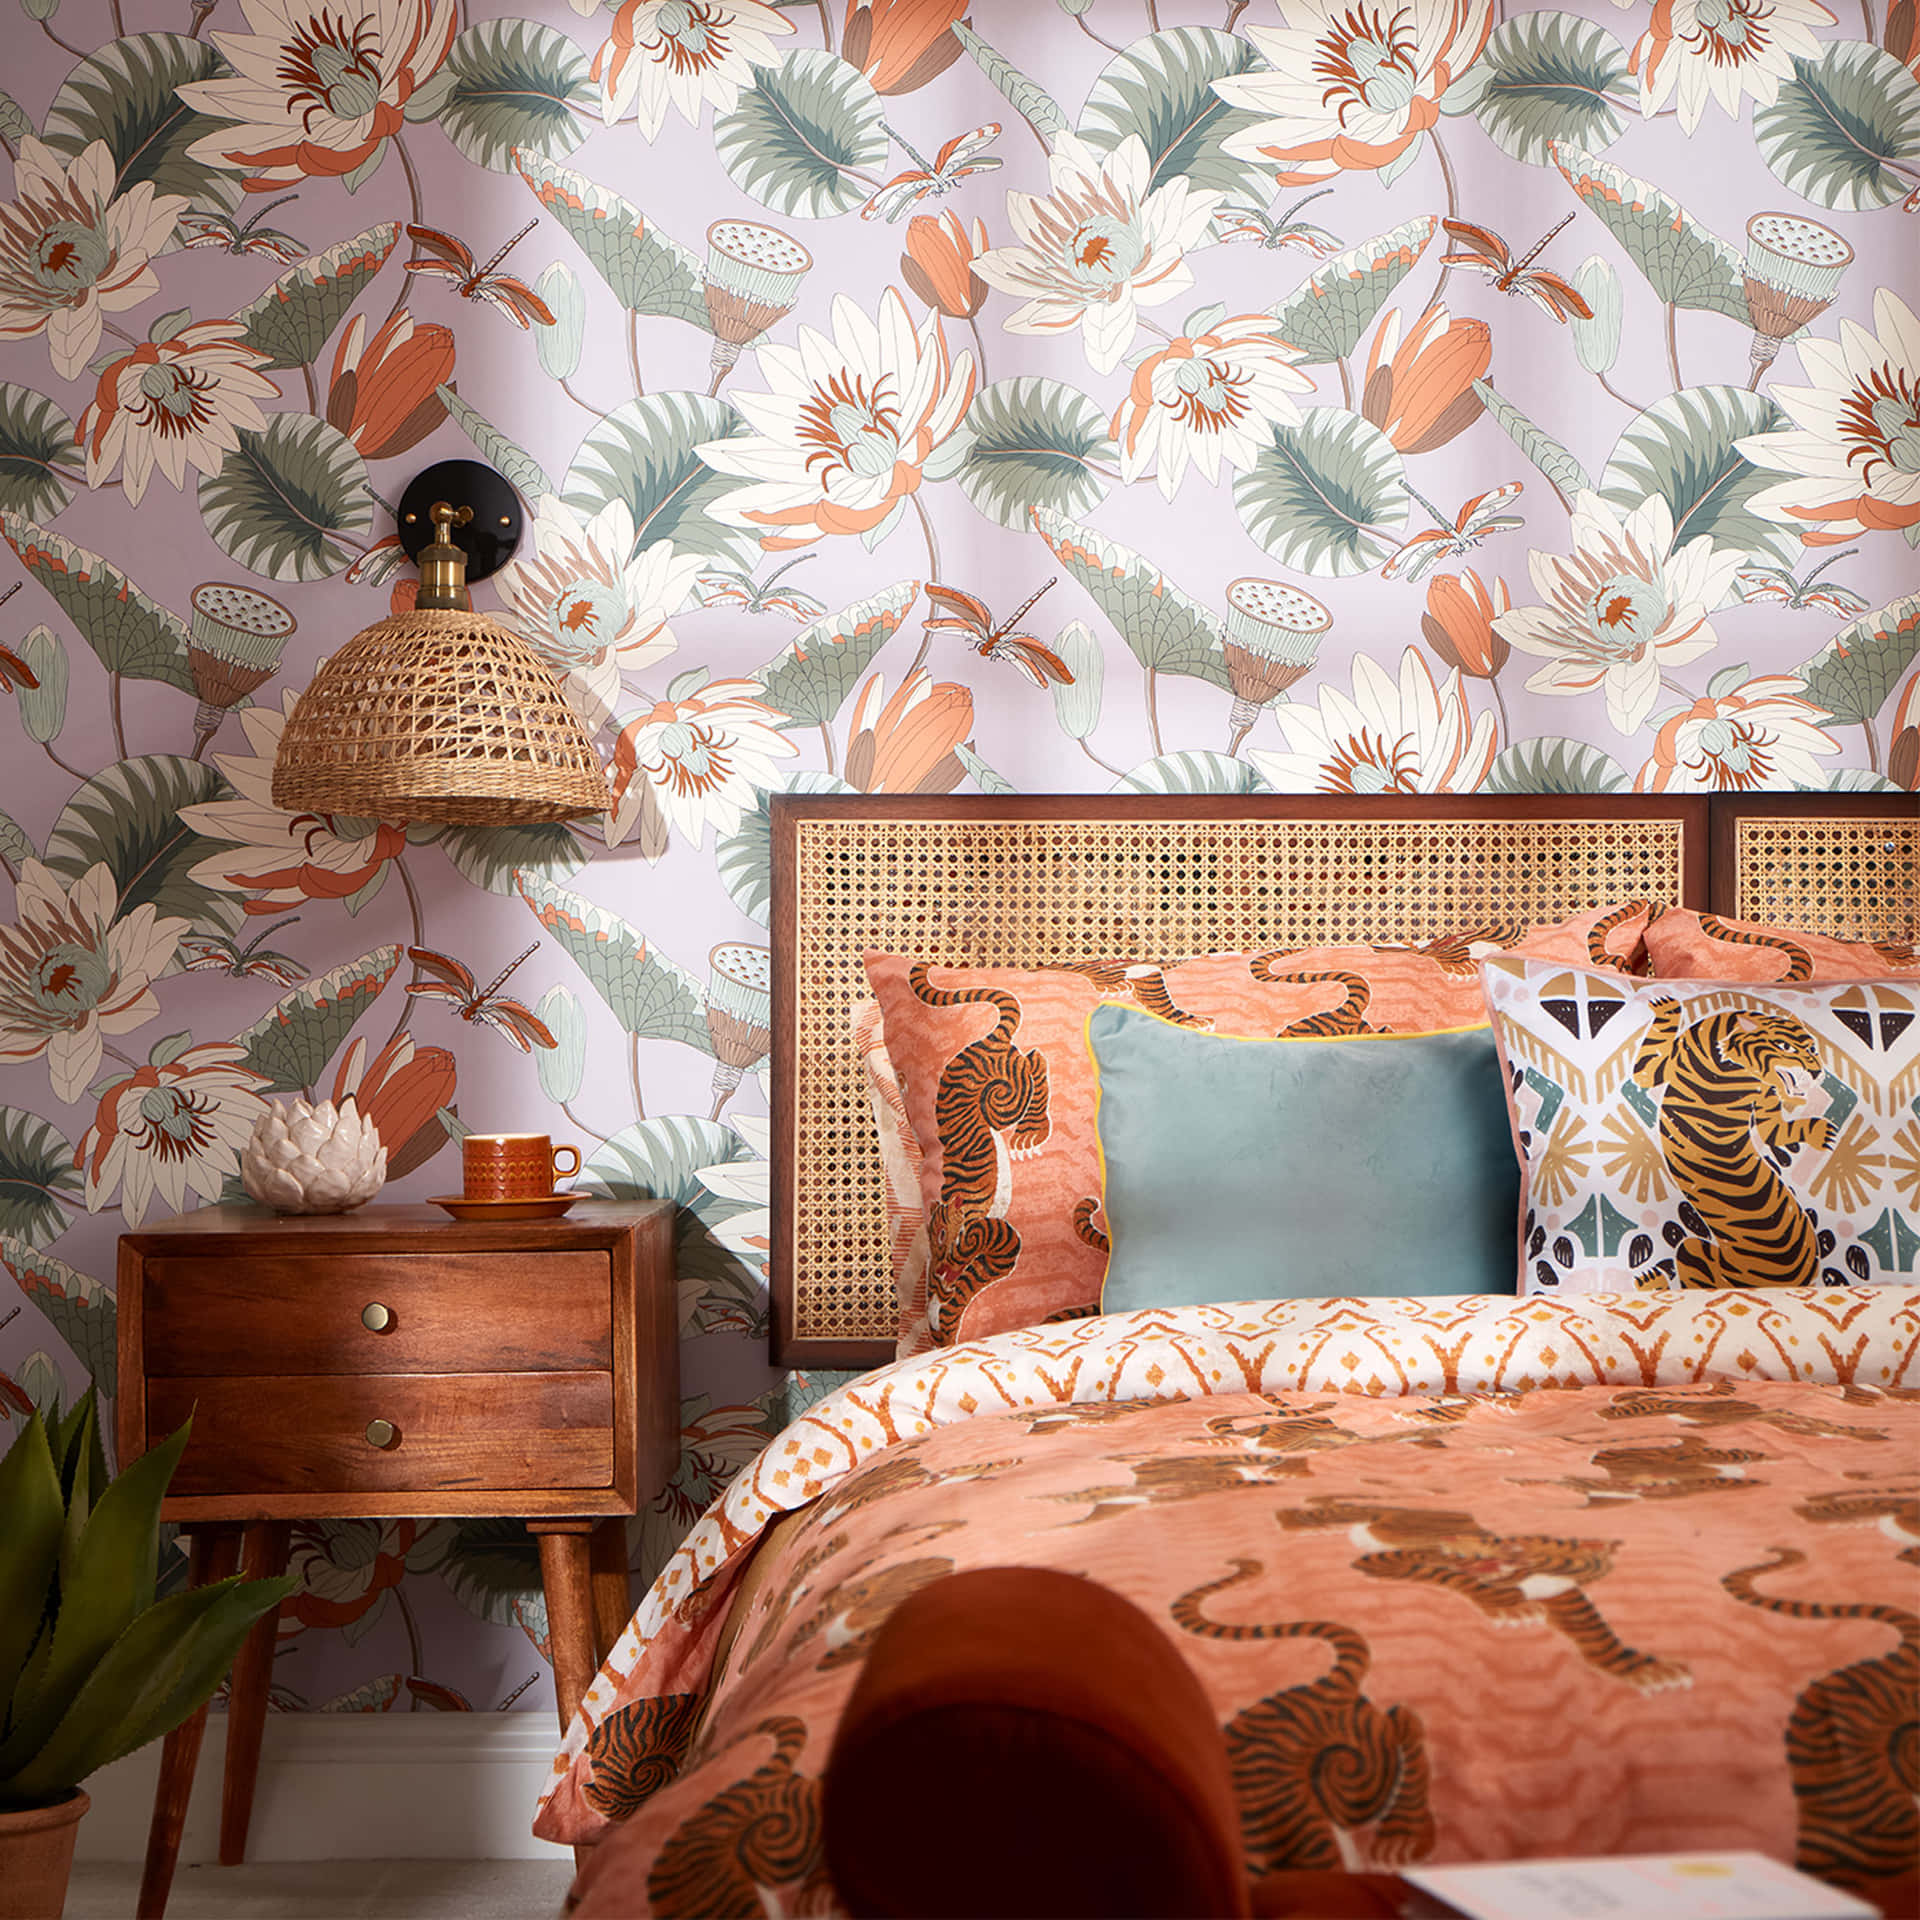 Woven Bed Headboard In Floral Wall